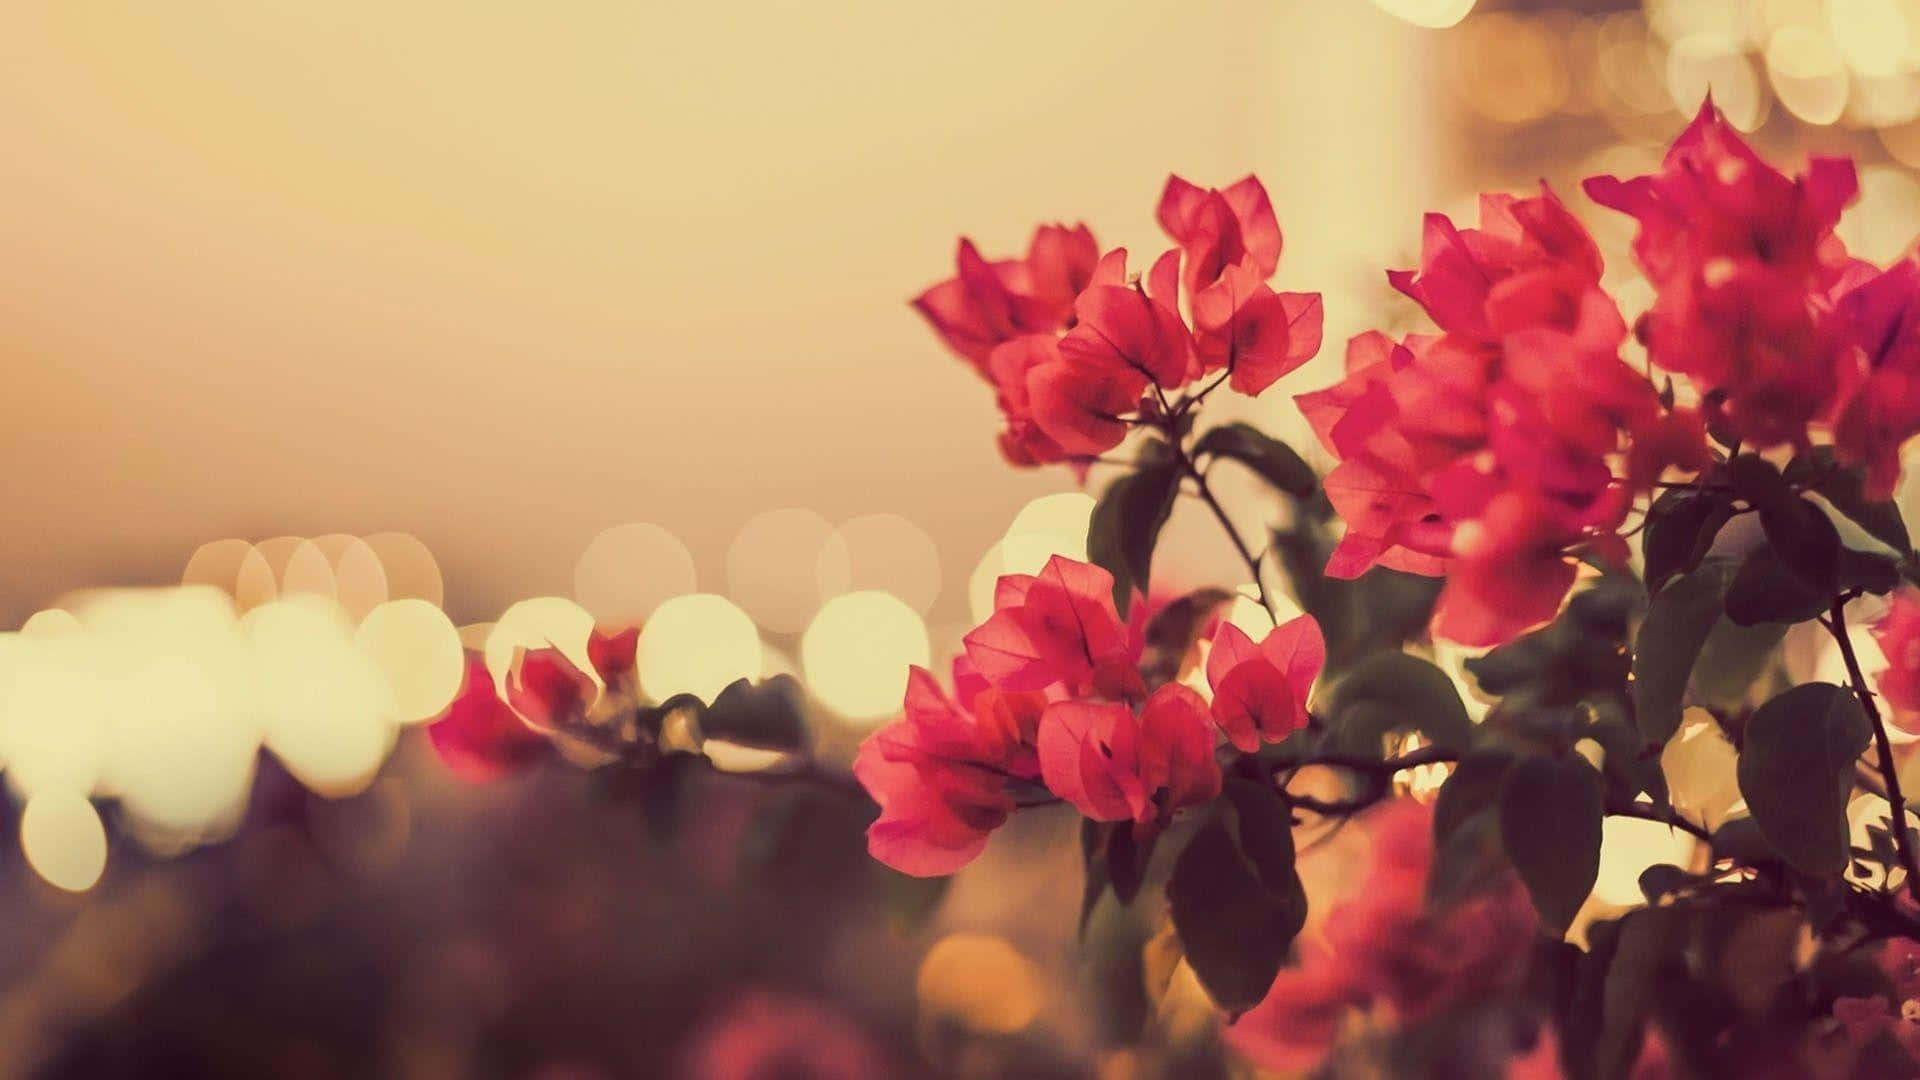 A Picture Of Flowers In Front Of A City Wallpaper